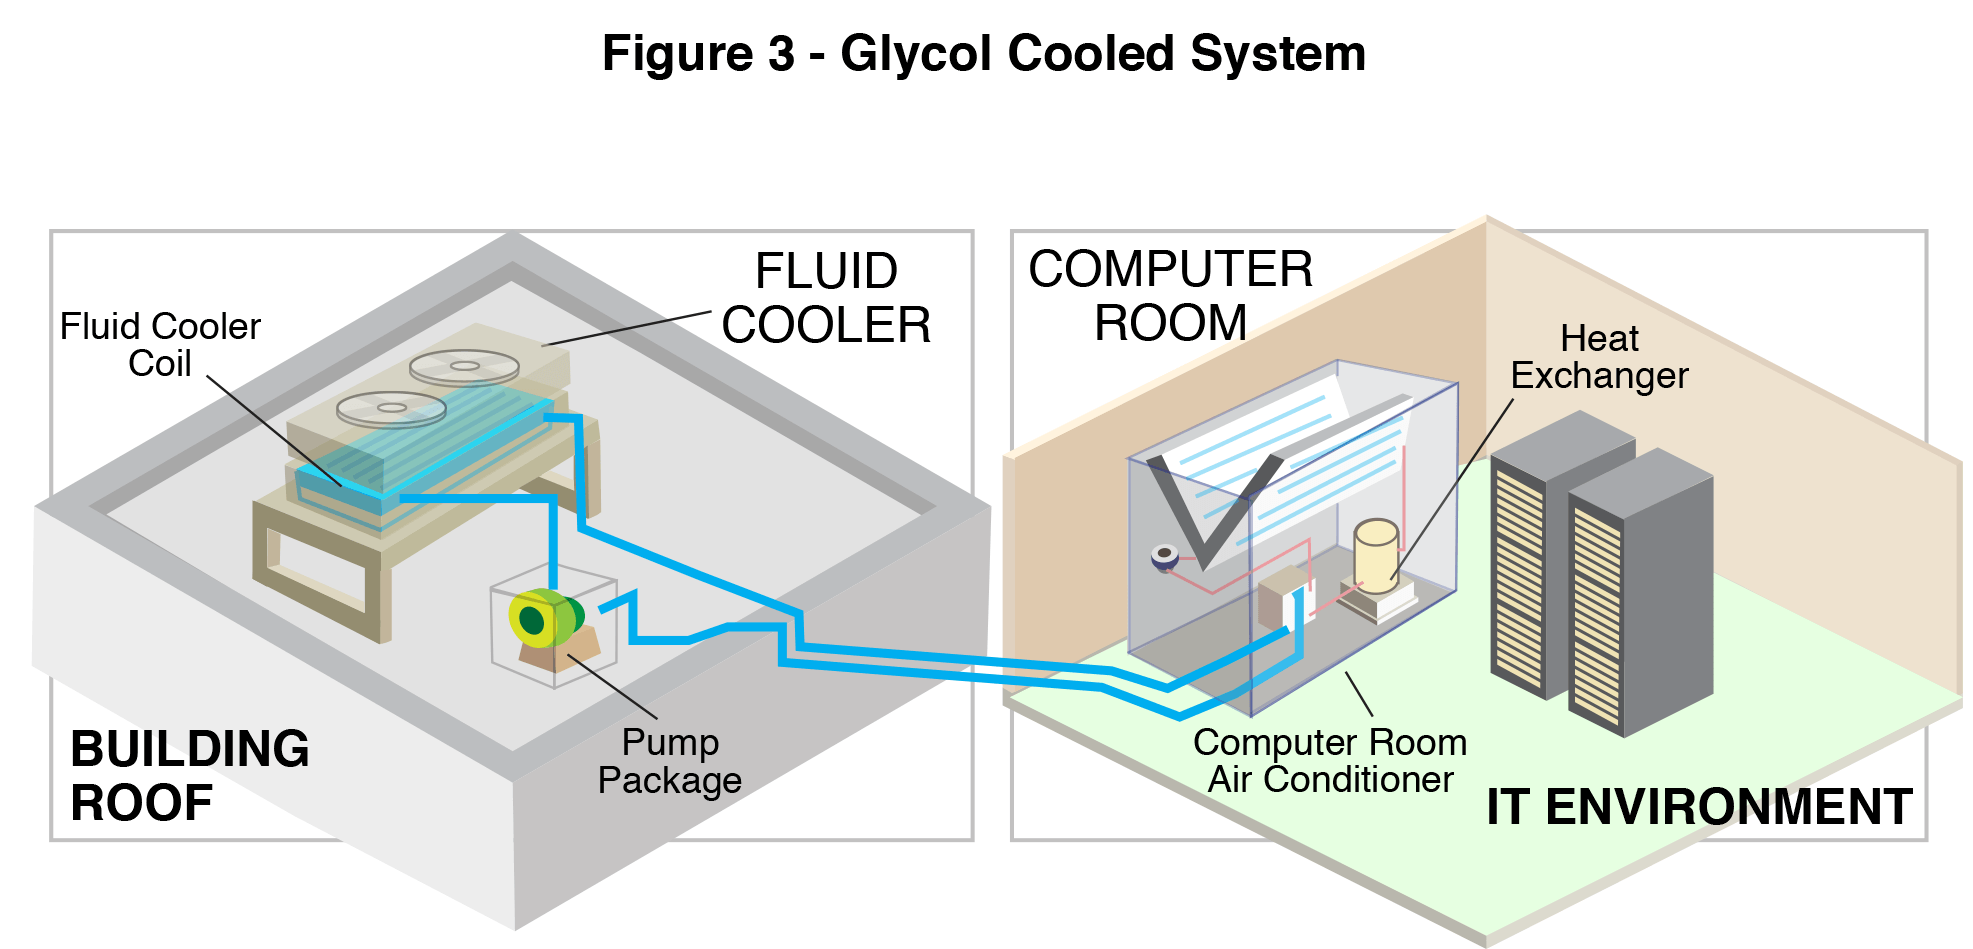 Glycol Cooled Systems